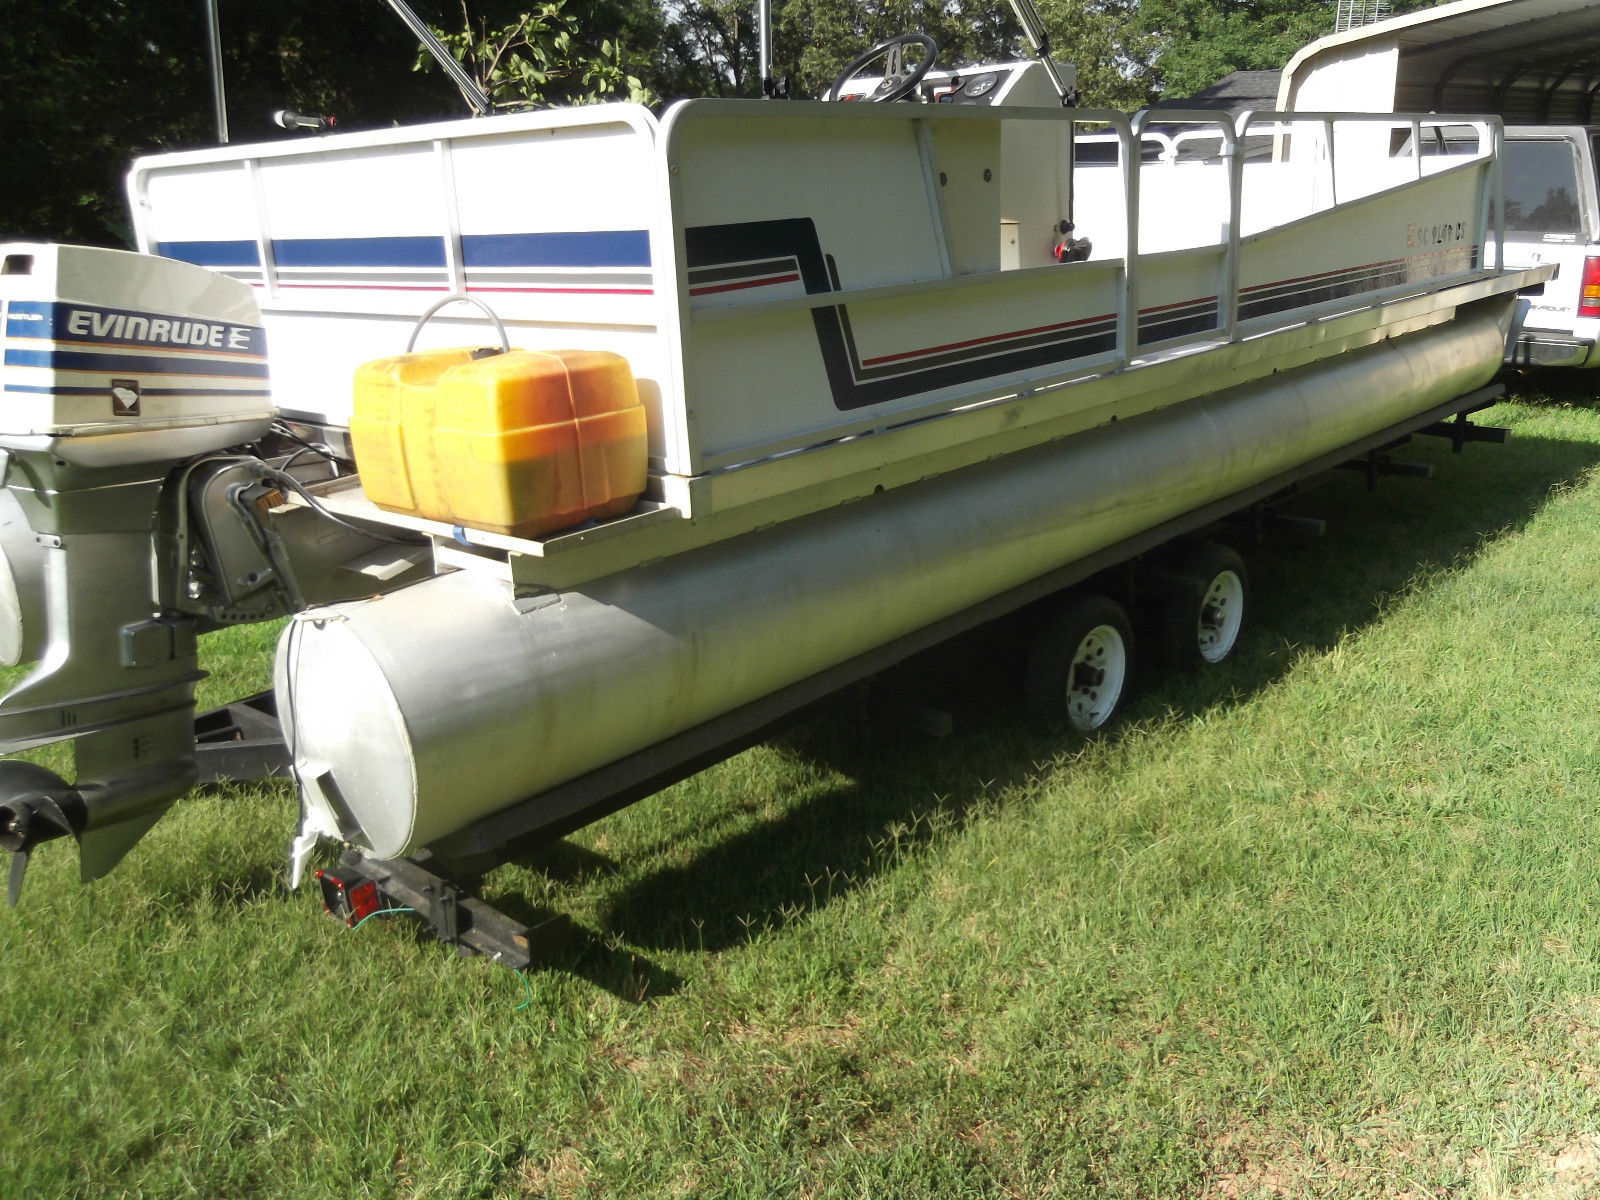 Pontoon Harris Kayot 1983 for sale for $3,500 - Boats-from 